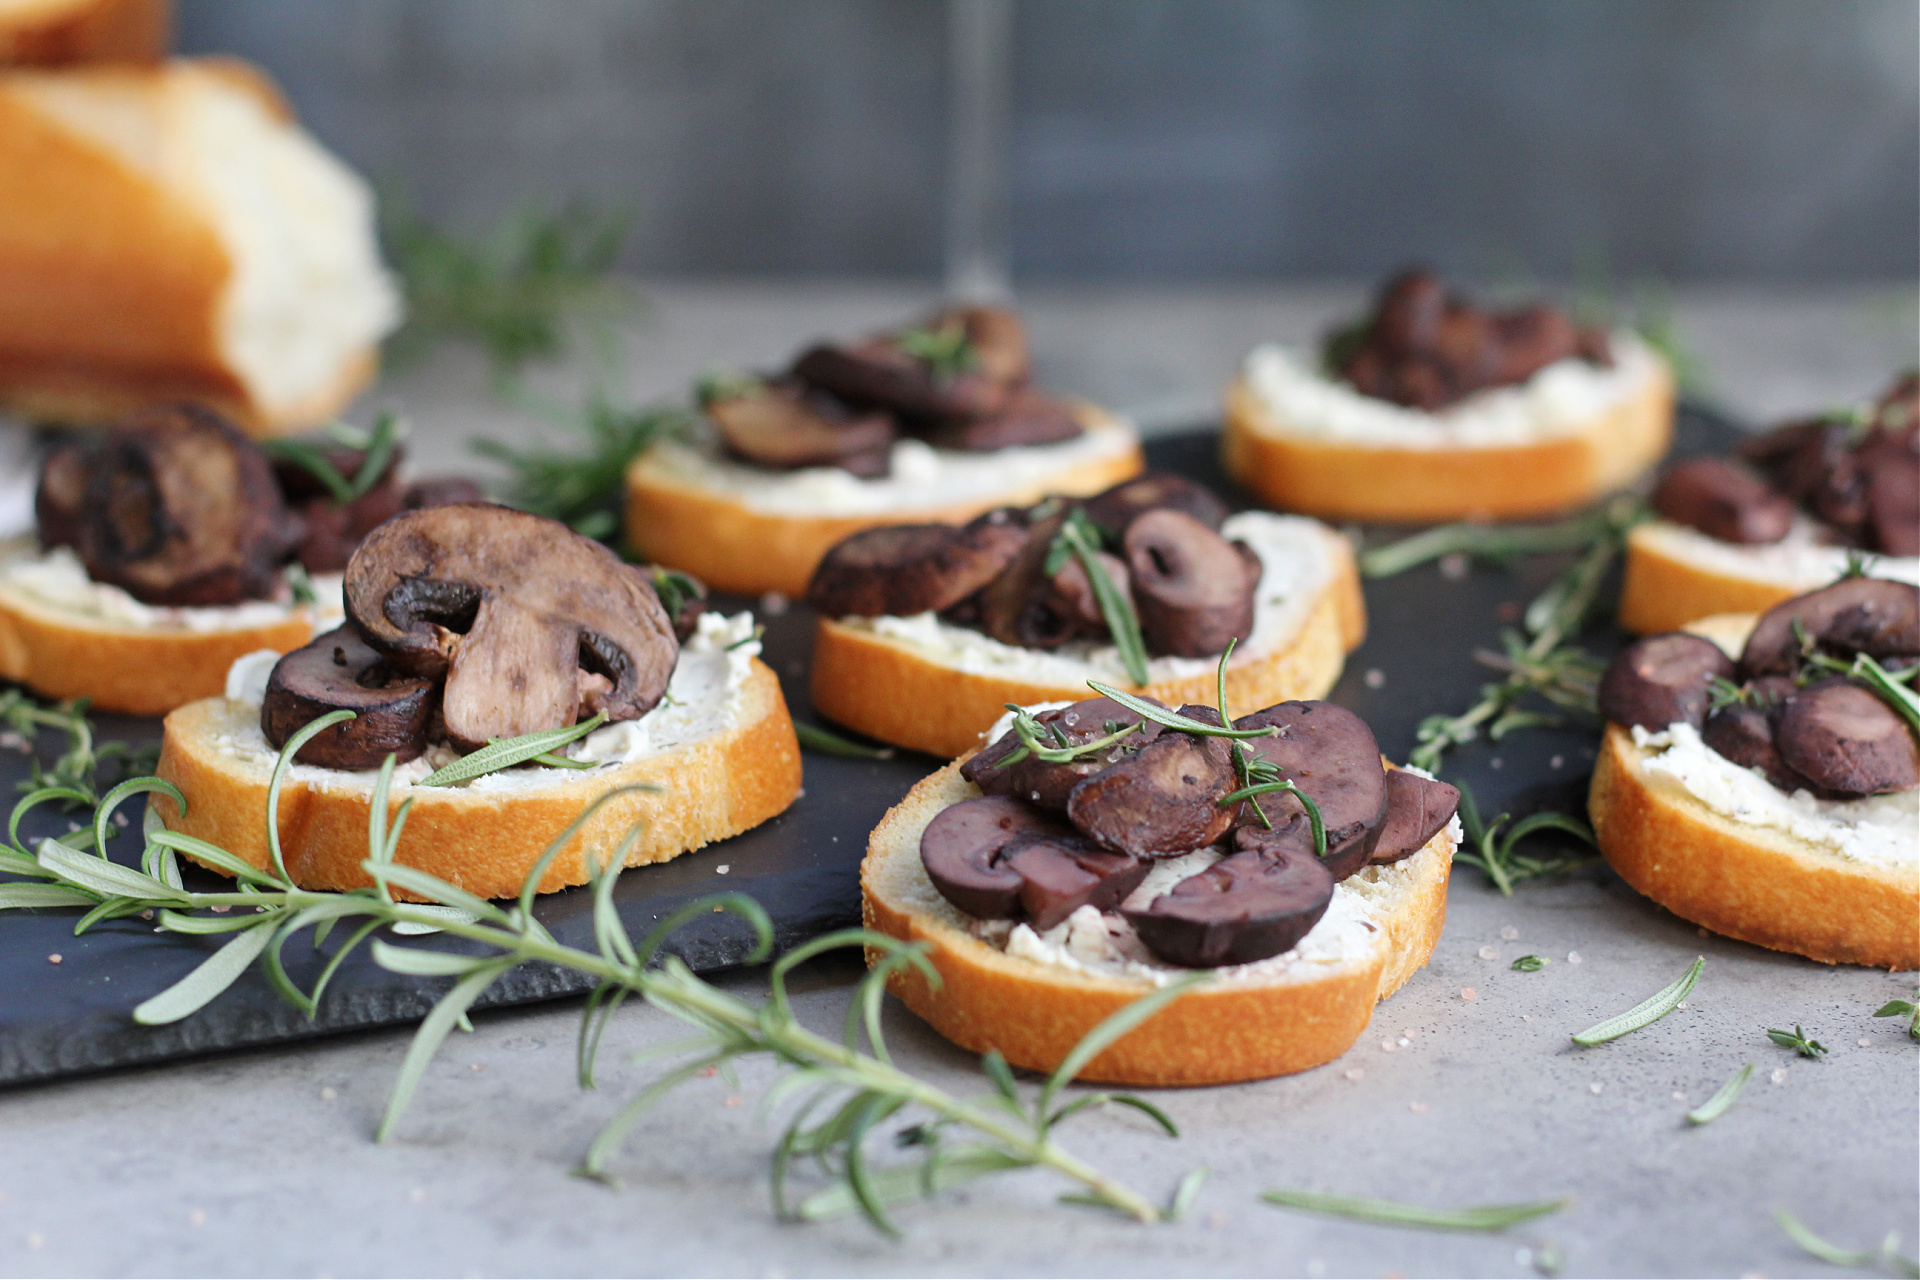 Roasted mushroom crostini with goat cheese and herbs